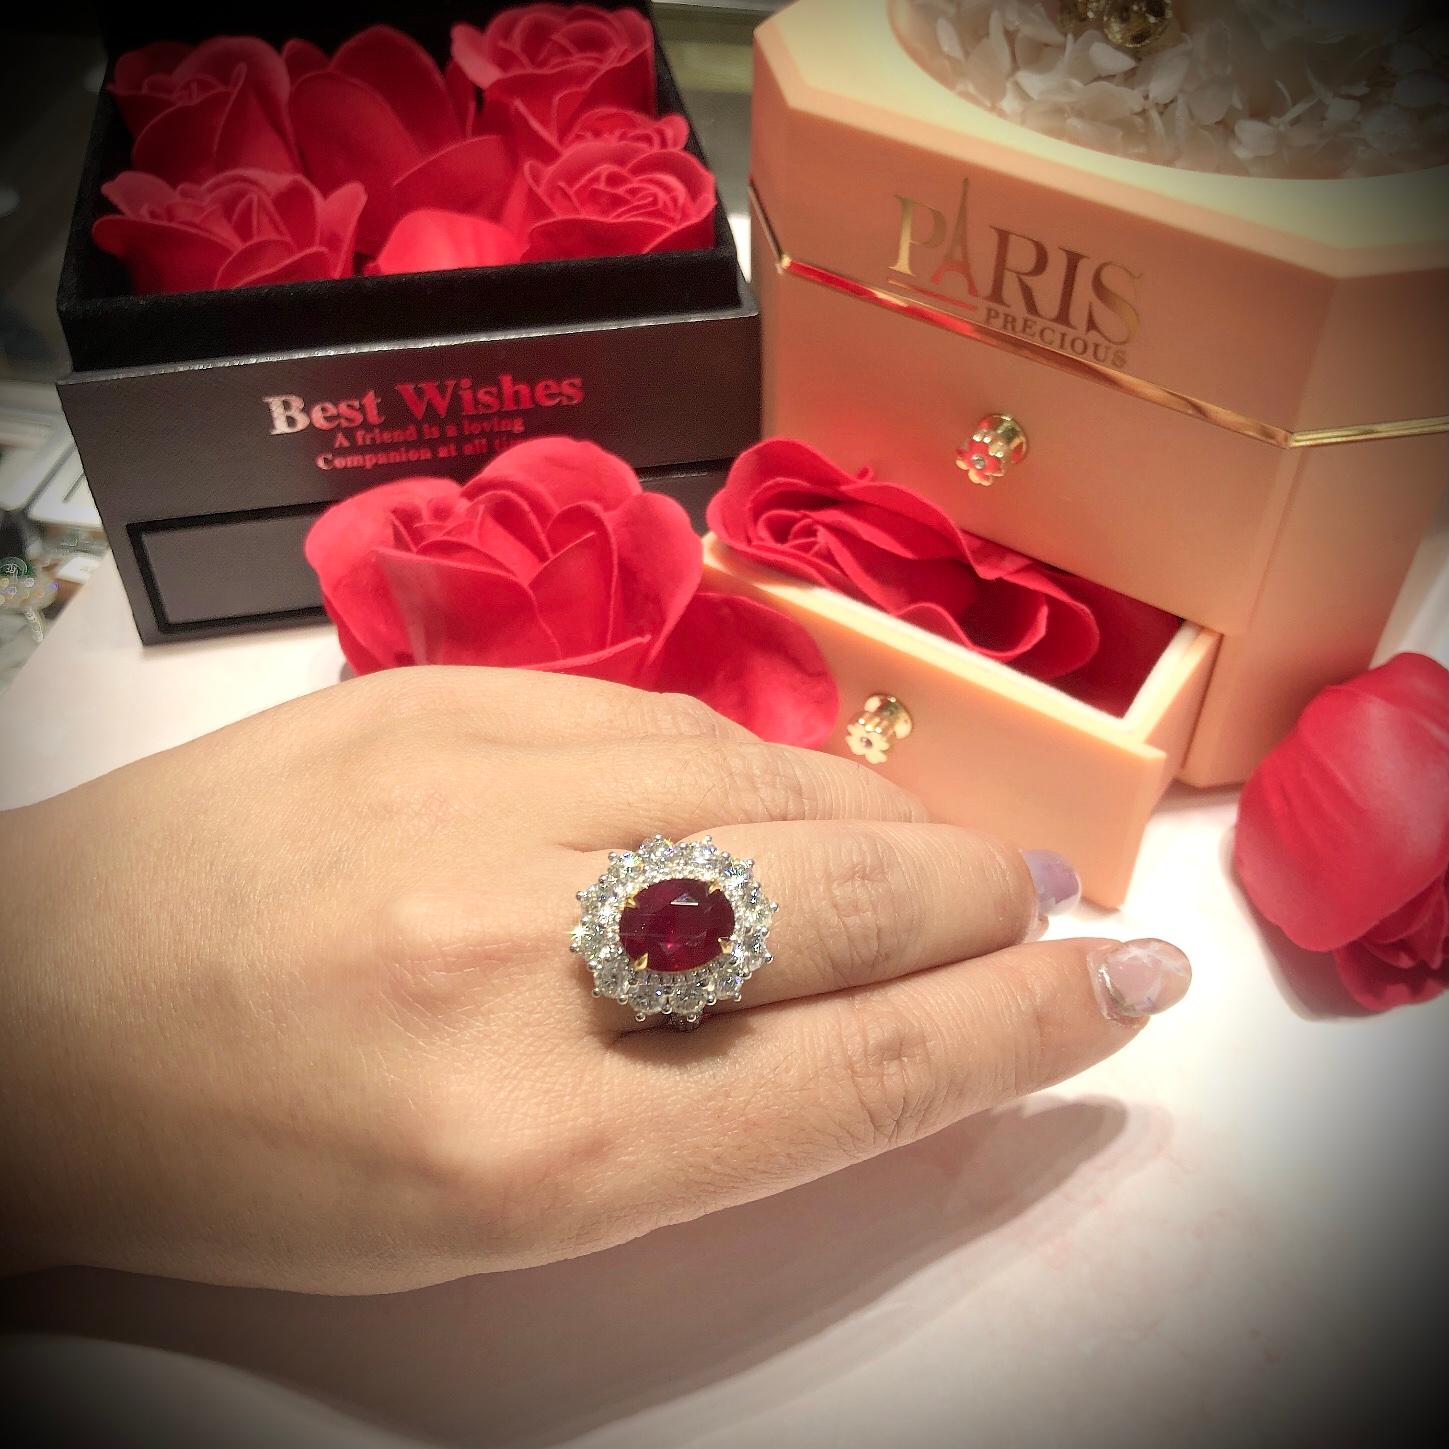 Paris Craft House 4.18 Carat GRS Mozambique Ruby Diamond Ring in Platinum For Sale 2